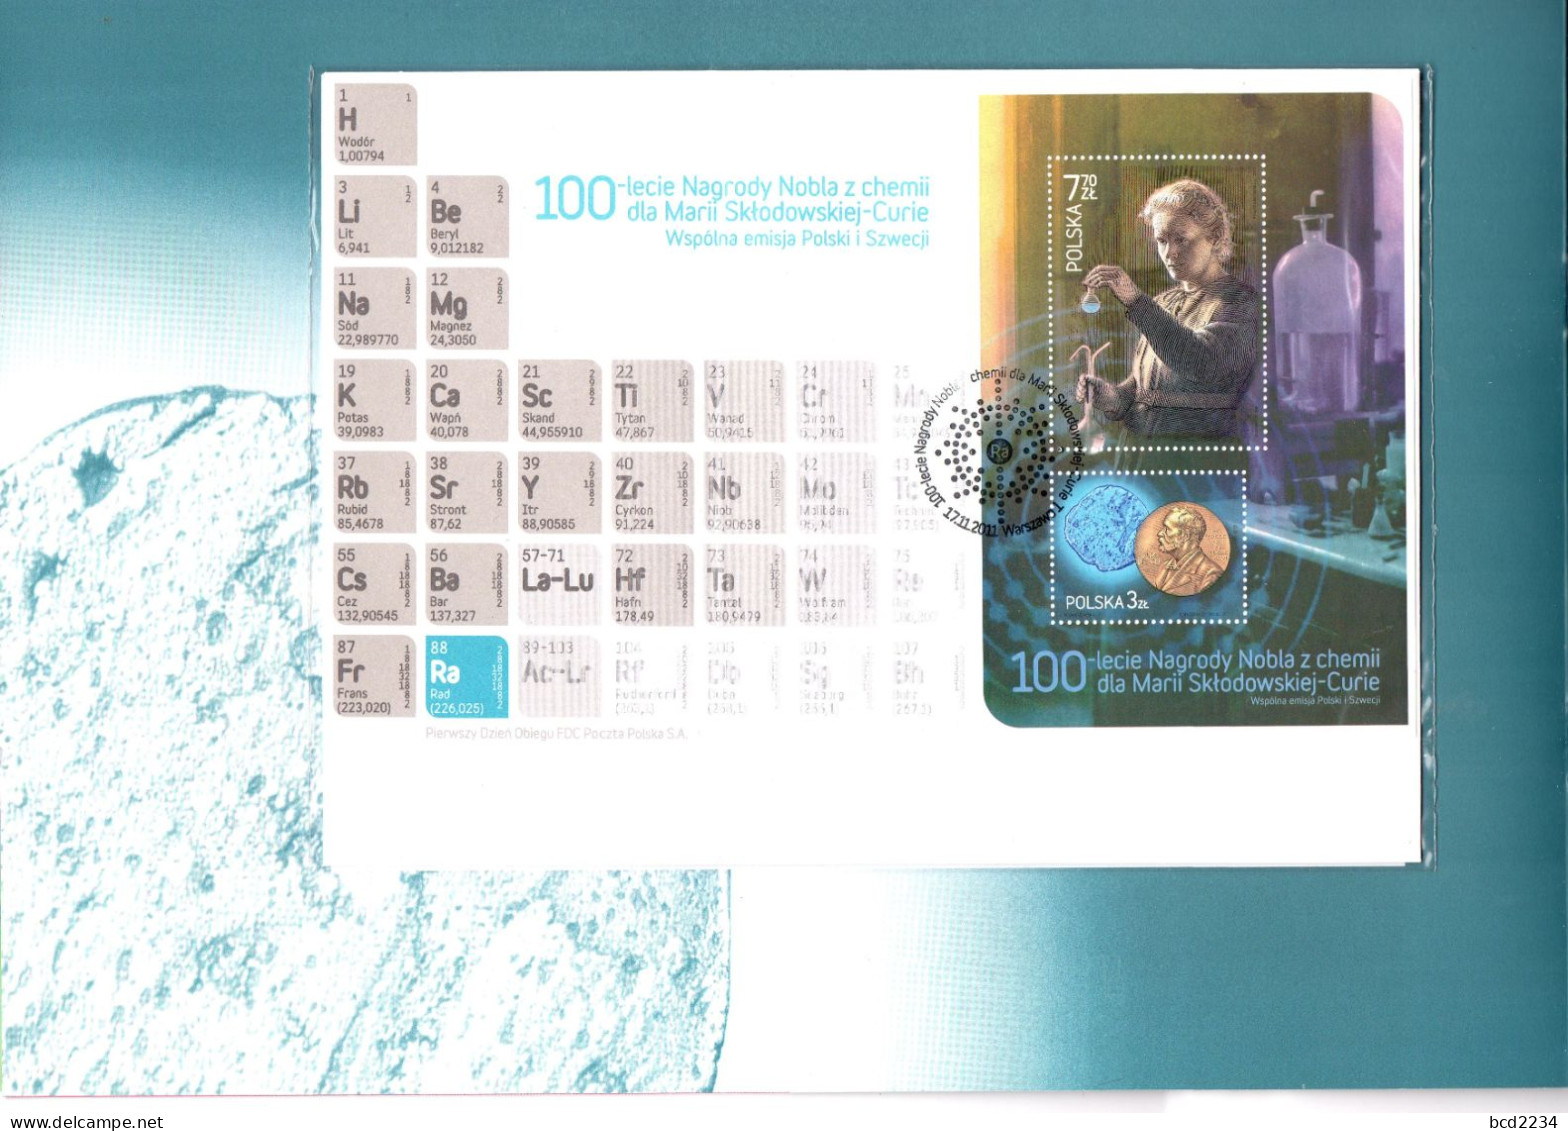 POLAND 2011 LIMITED EDITION: RARE 100TH ANNIVERSARY MARIE CURIE NOBEL PRIZE CHEMISTRY FOLDER FDC MS PL SWEDEN - Chimica